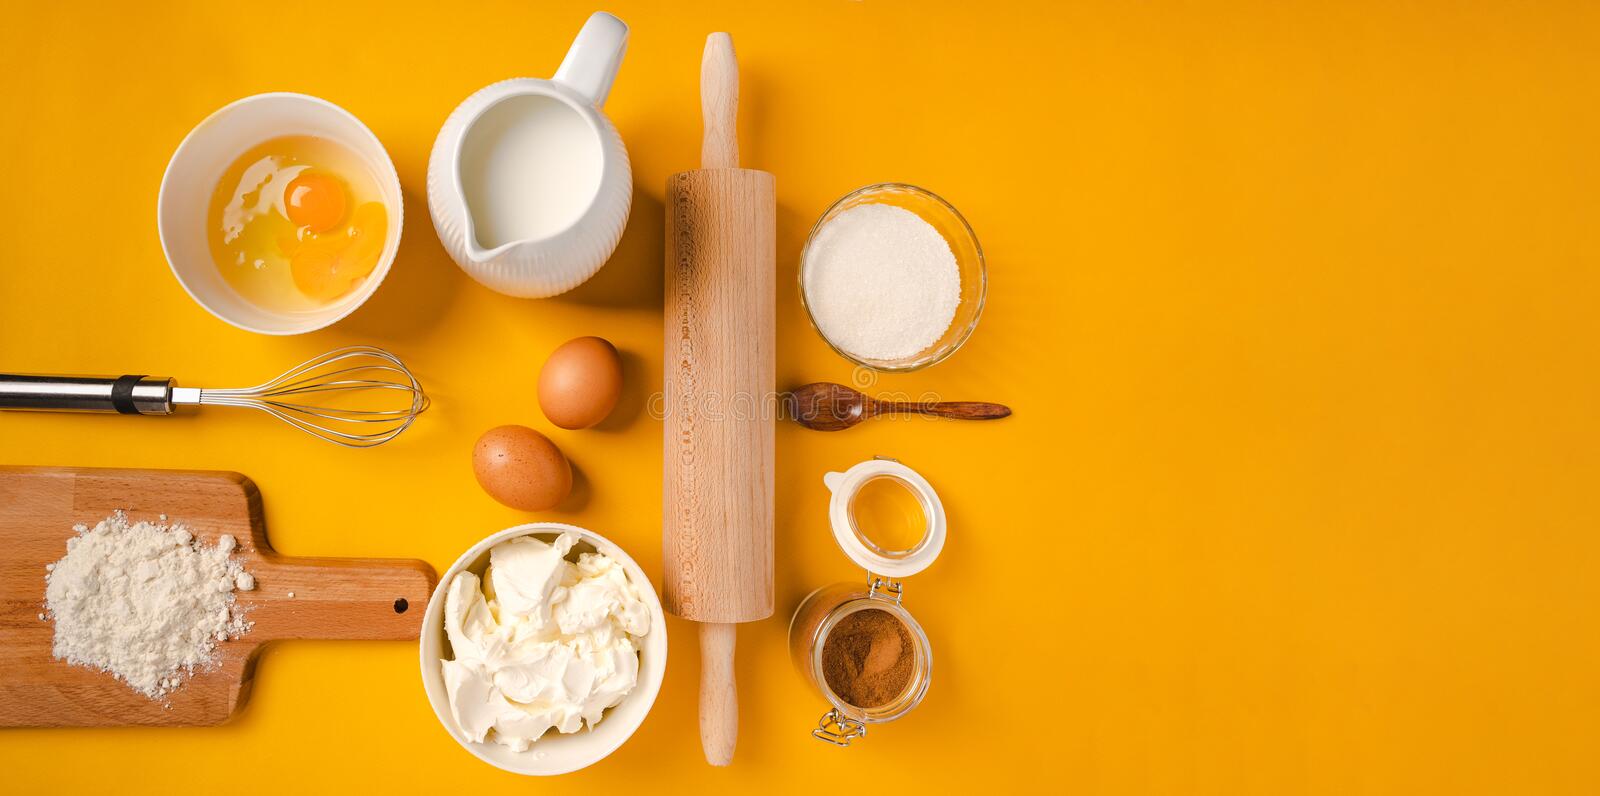 ESSENTIAL BAKING EQUIPMENT & THEIR USES